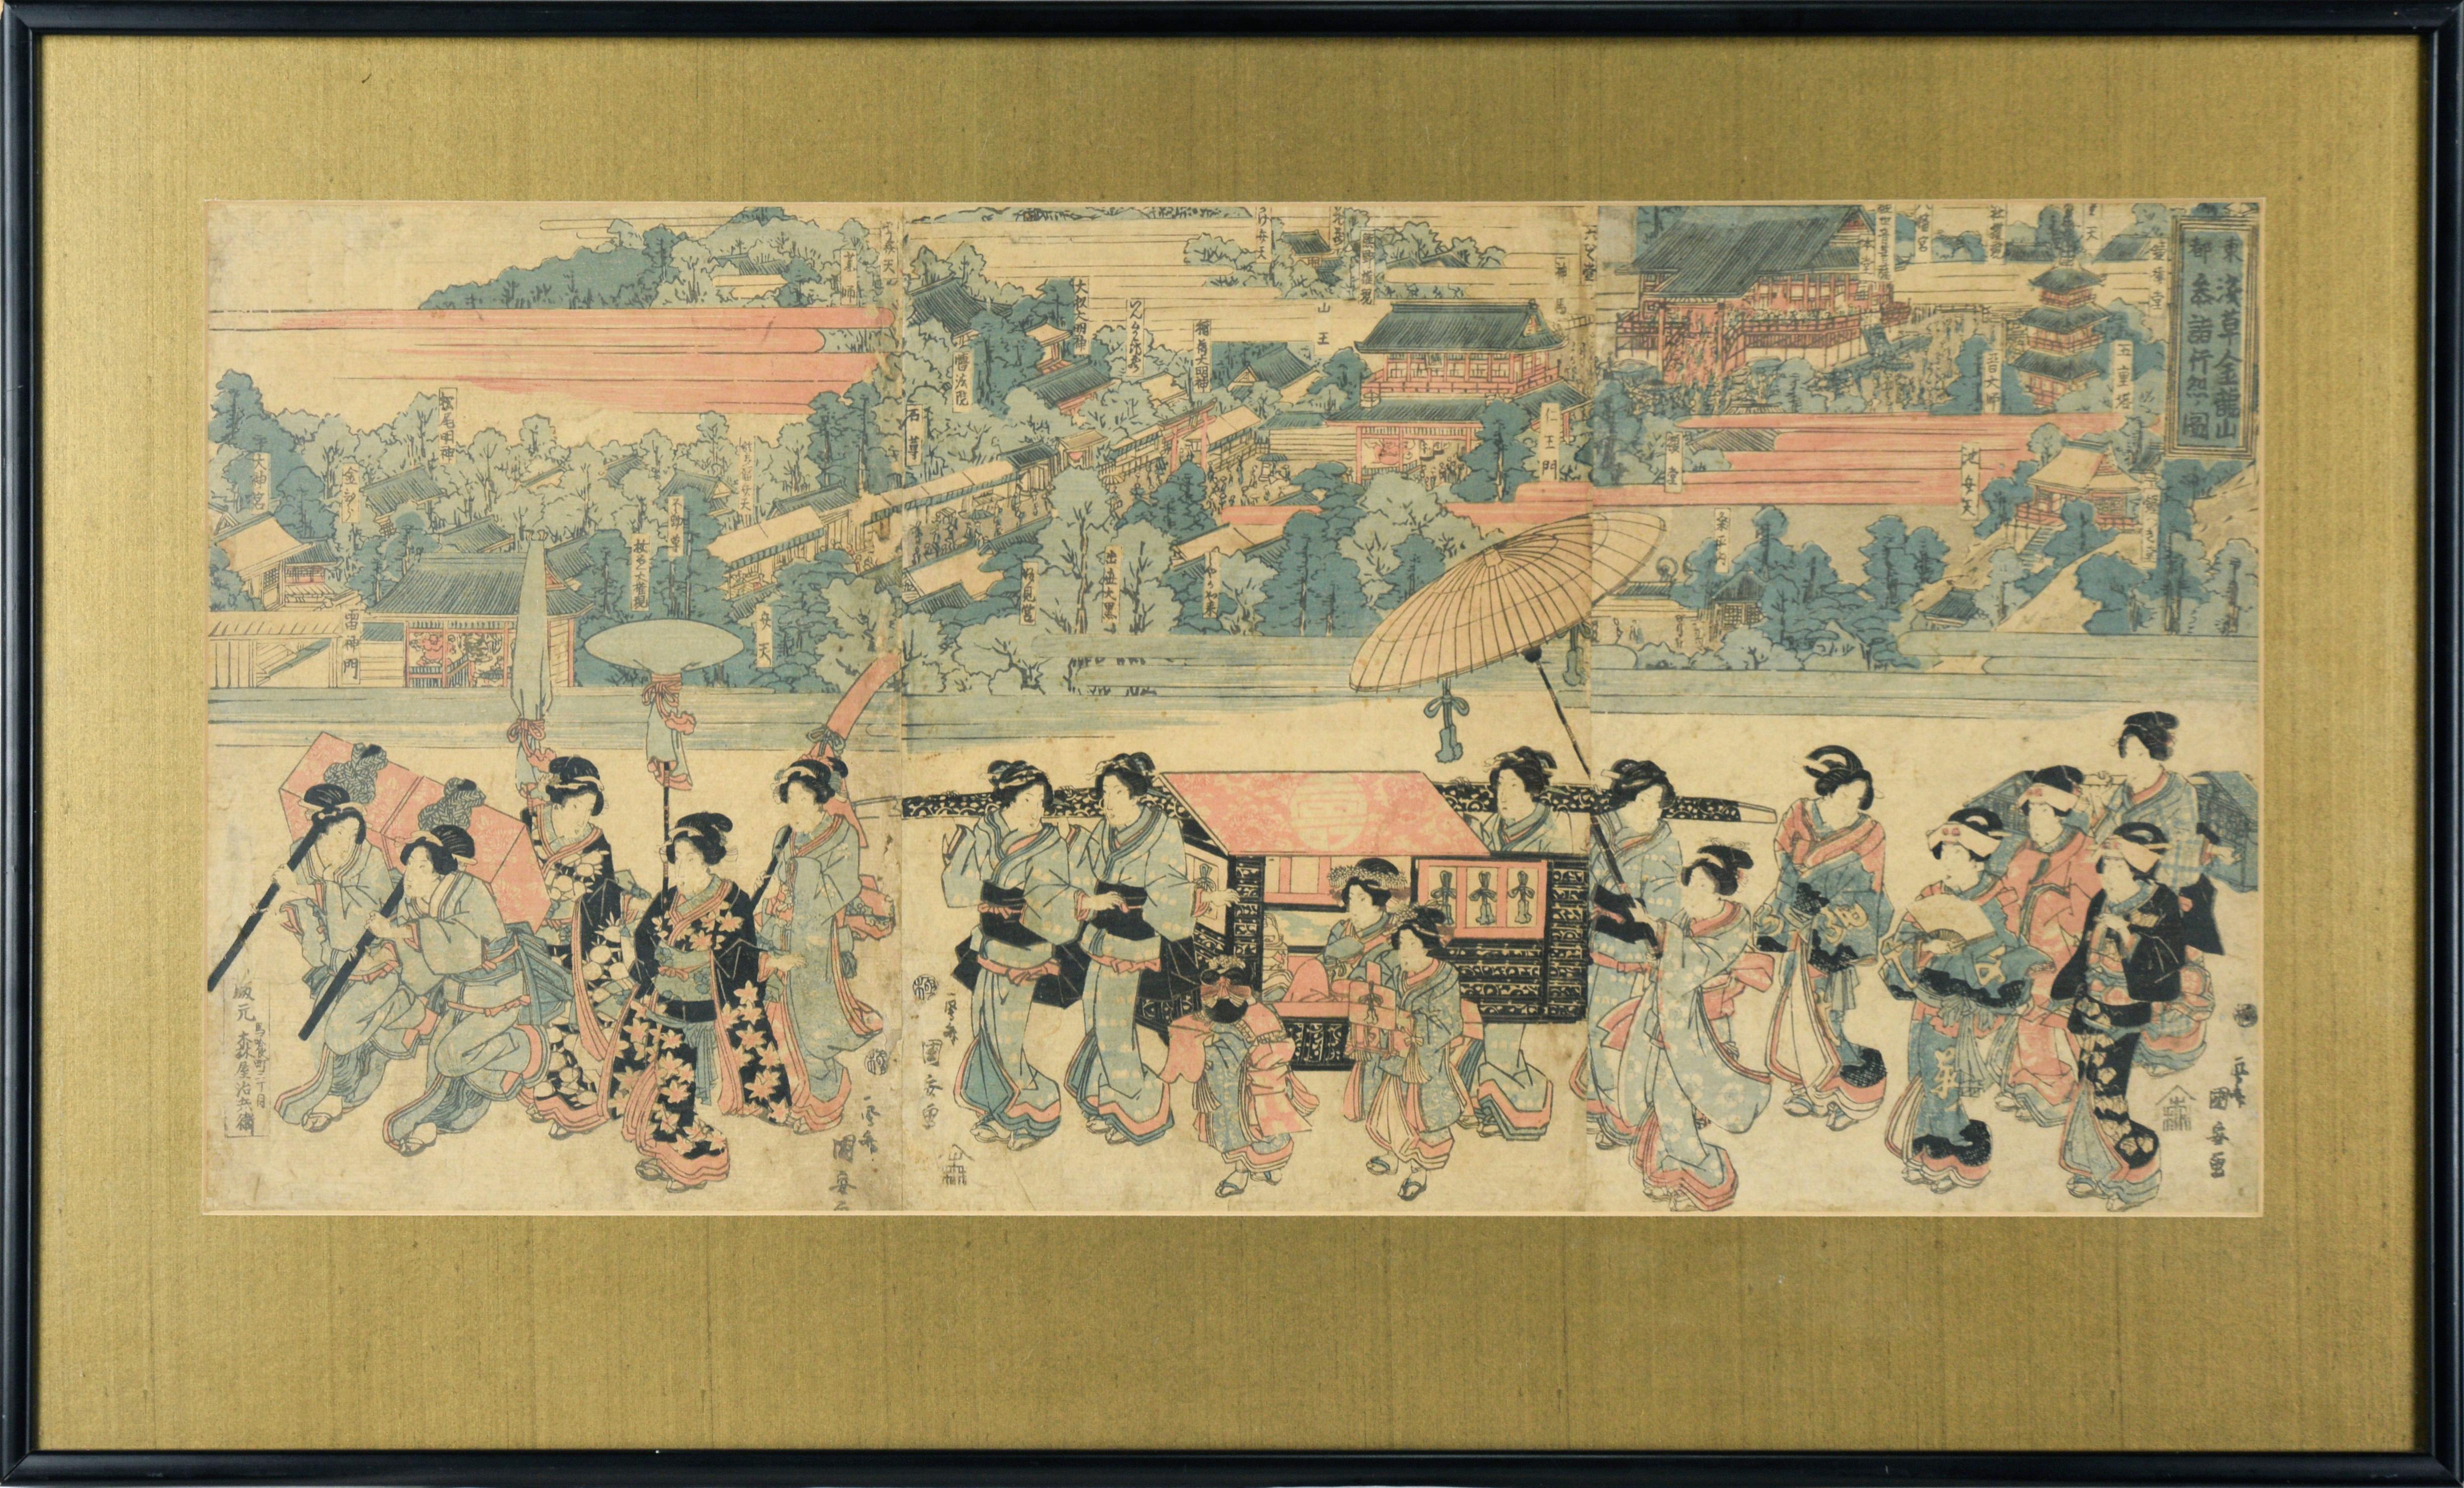 The Pilgrimage Procession to Kinryuzan Temple at Asakusa in the Eastern Capital